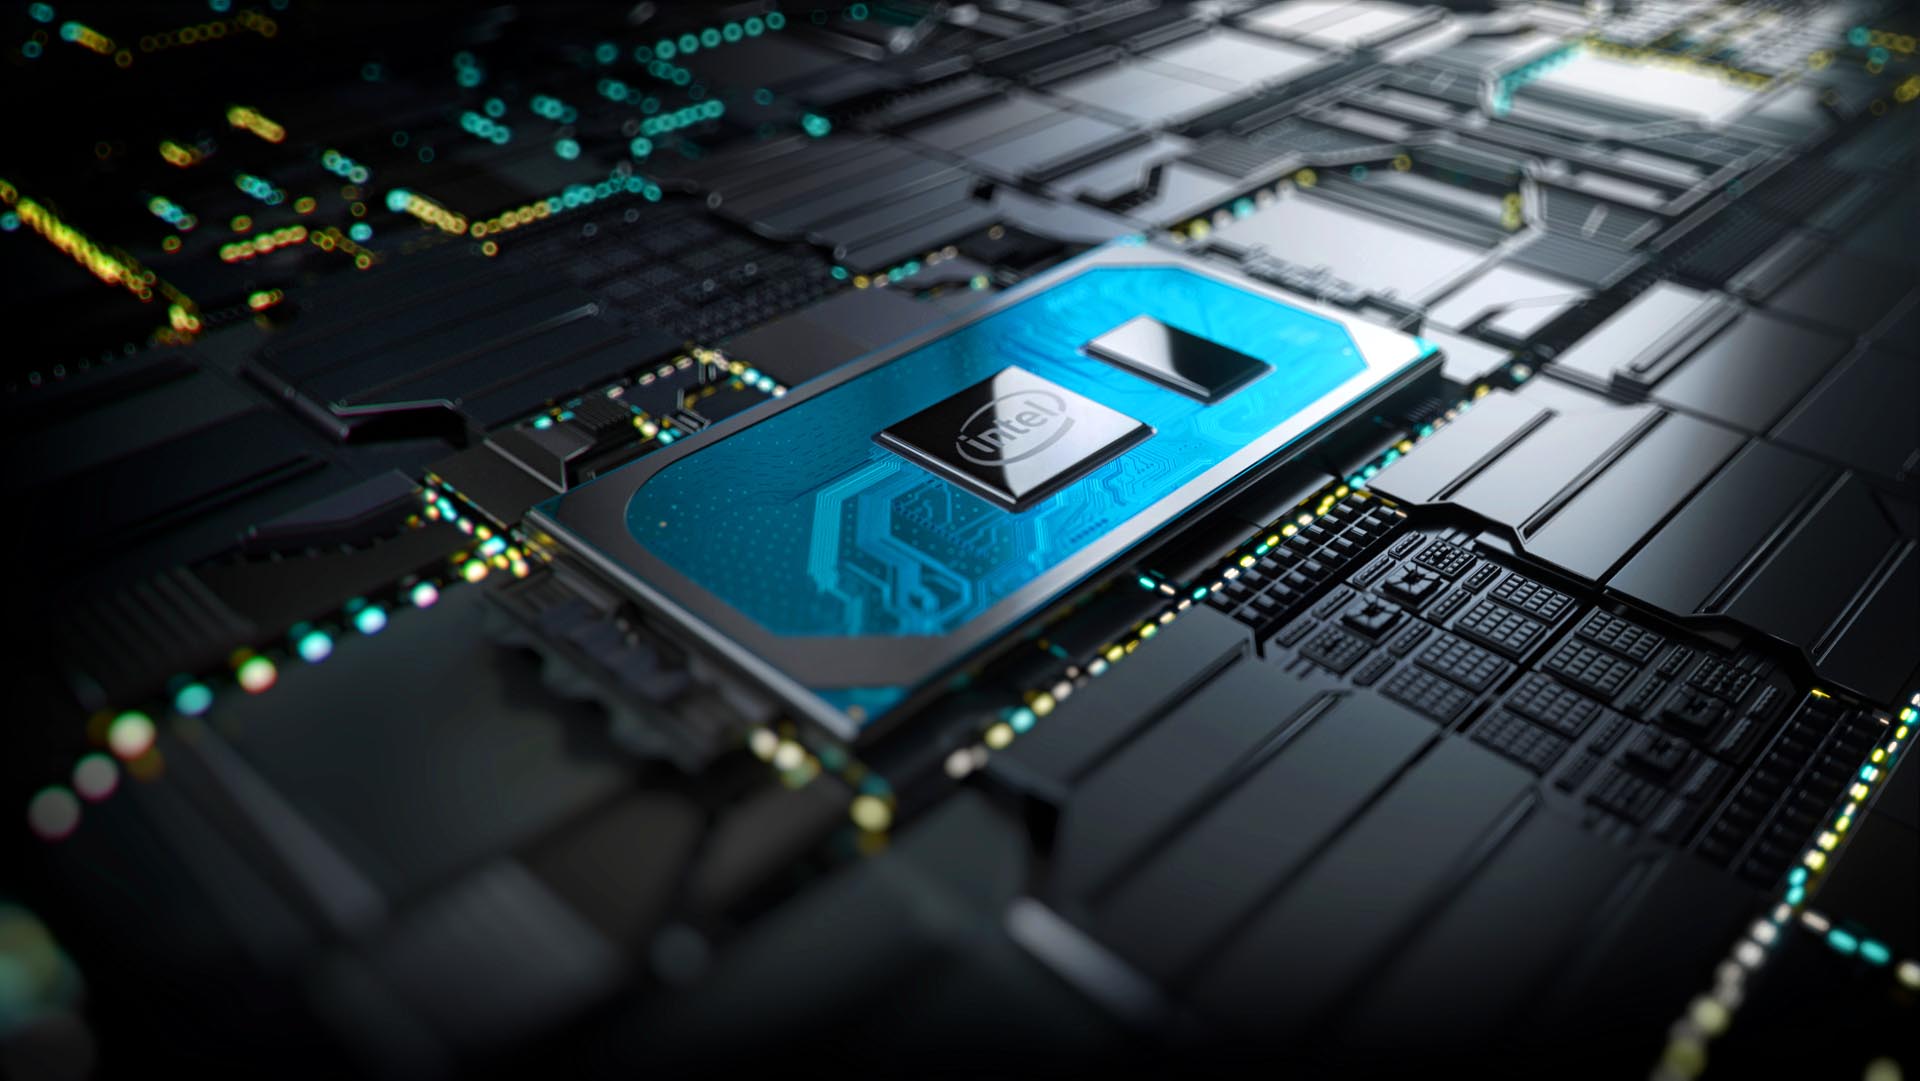 Intel beats AMD and Nvidia to crowd-pleasing graphics feature: integer scaling | PCGamesN